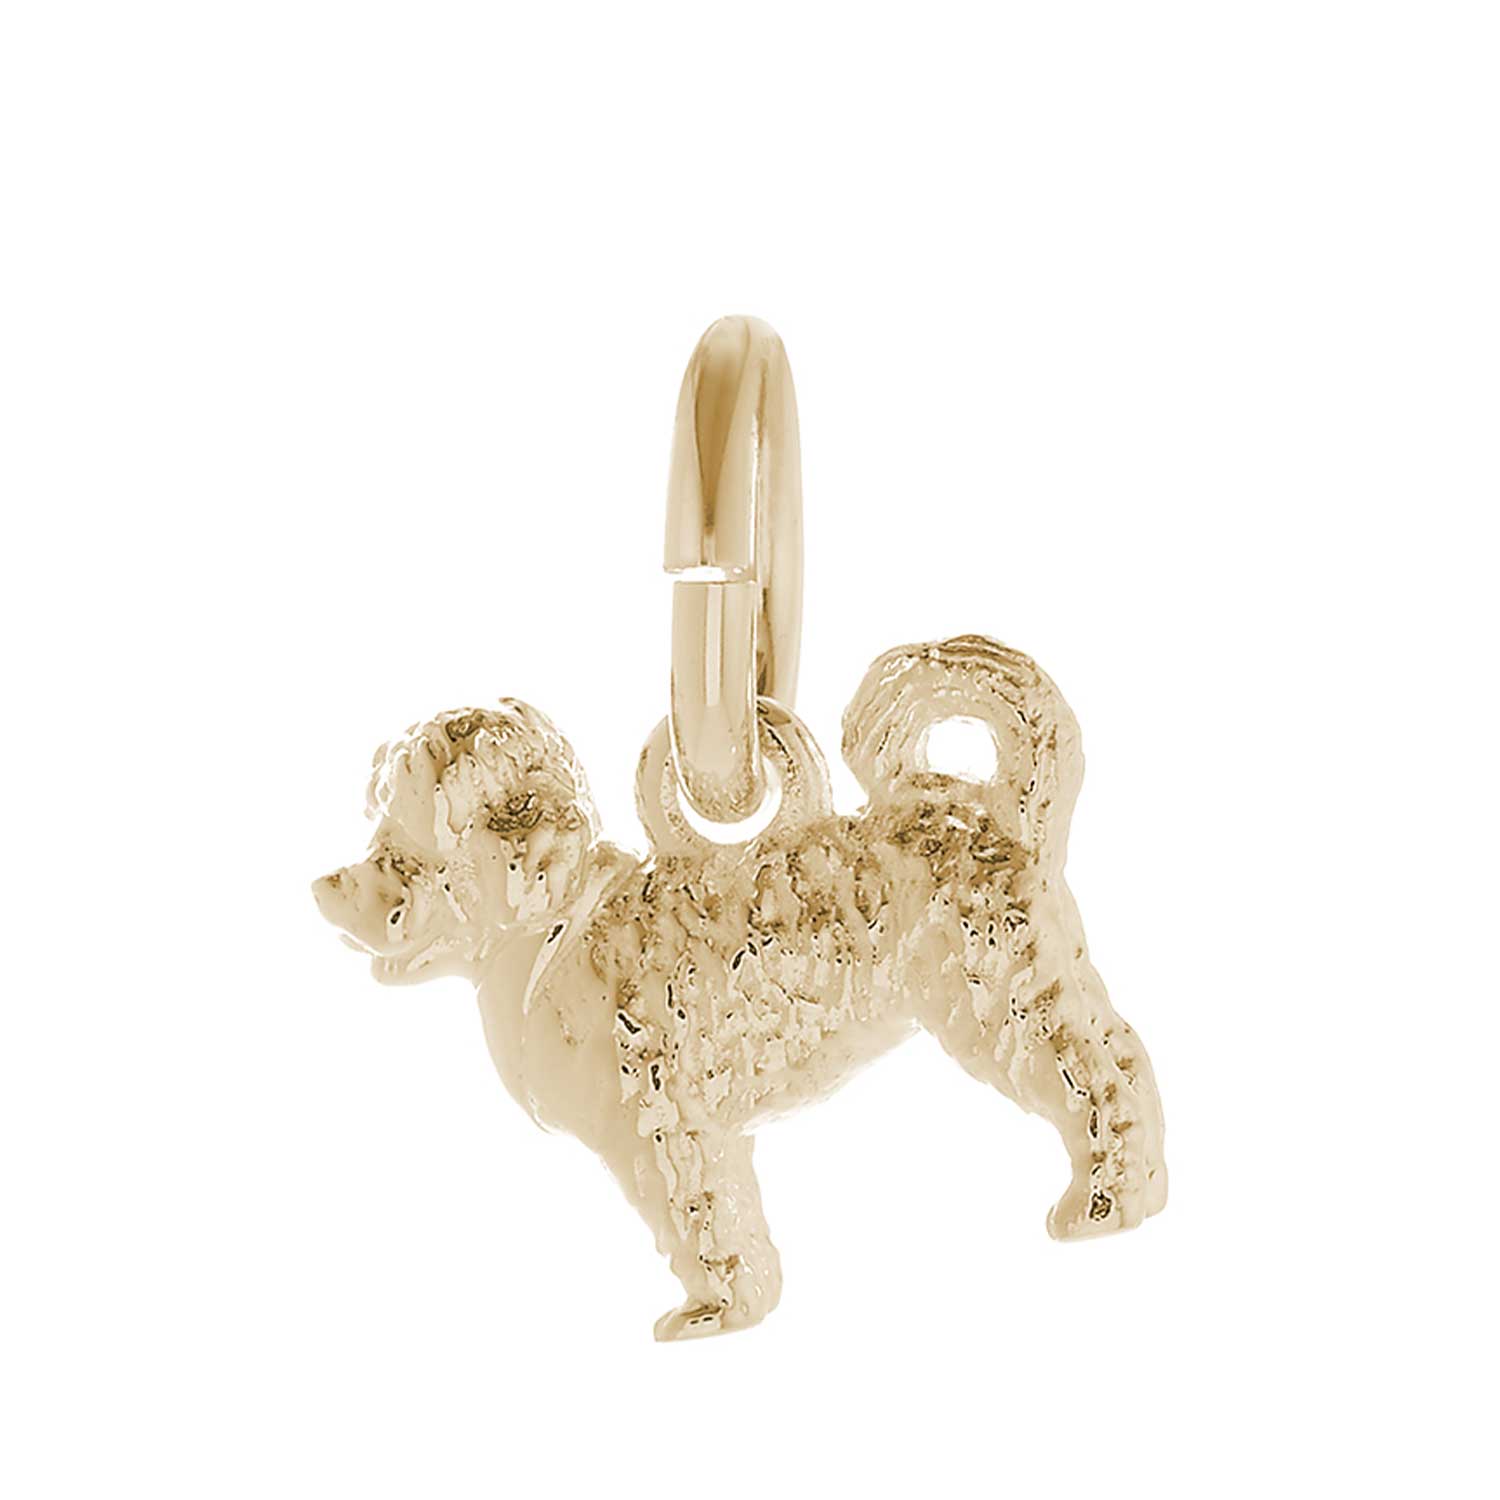 Solid 9ct gold Cavapoo charm with tiny bandana (optional), perfect for a charm bracelet or necklace.